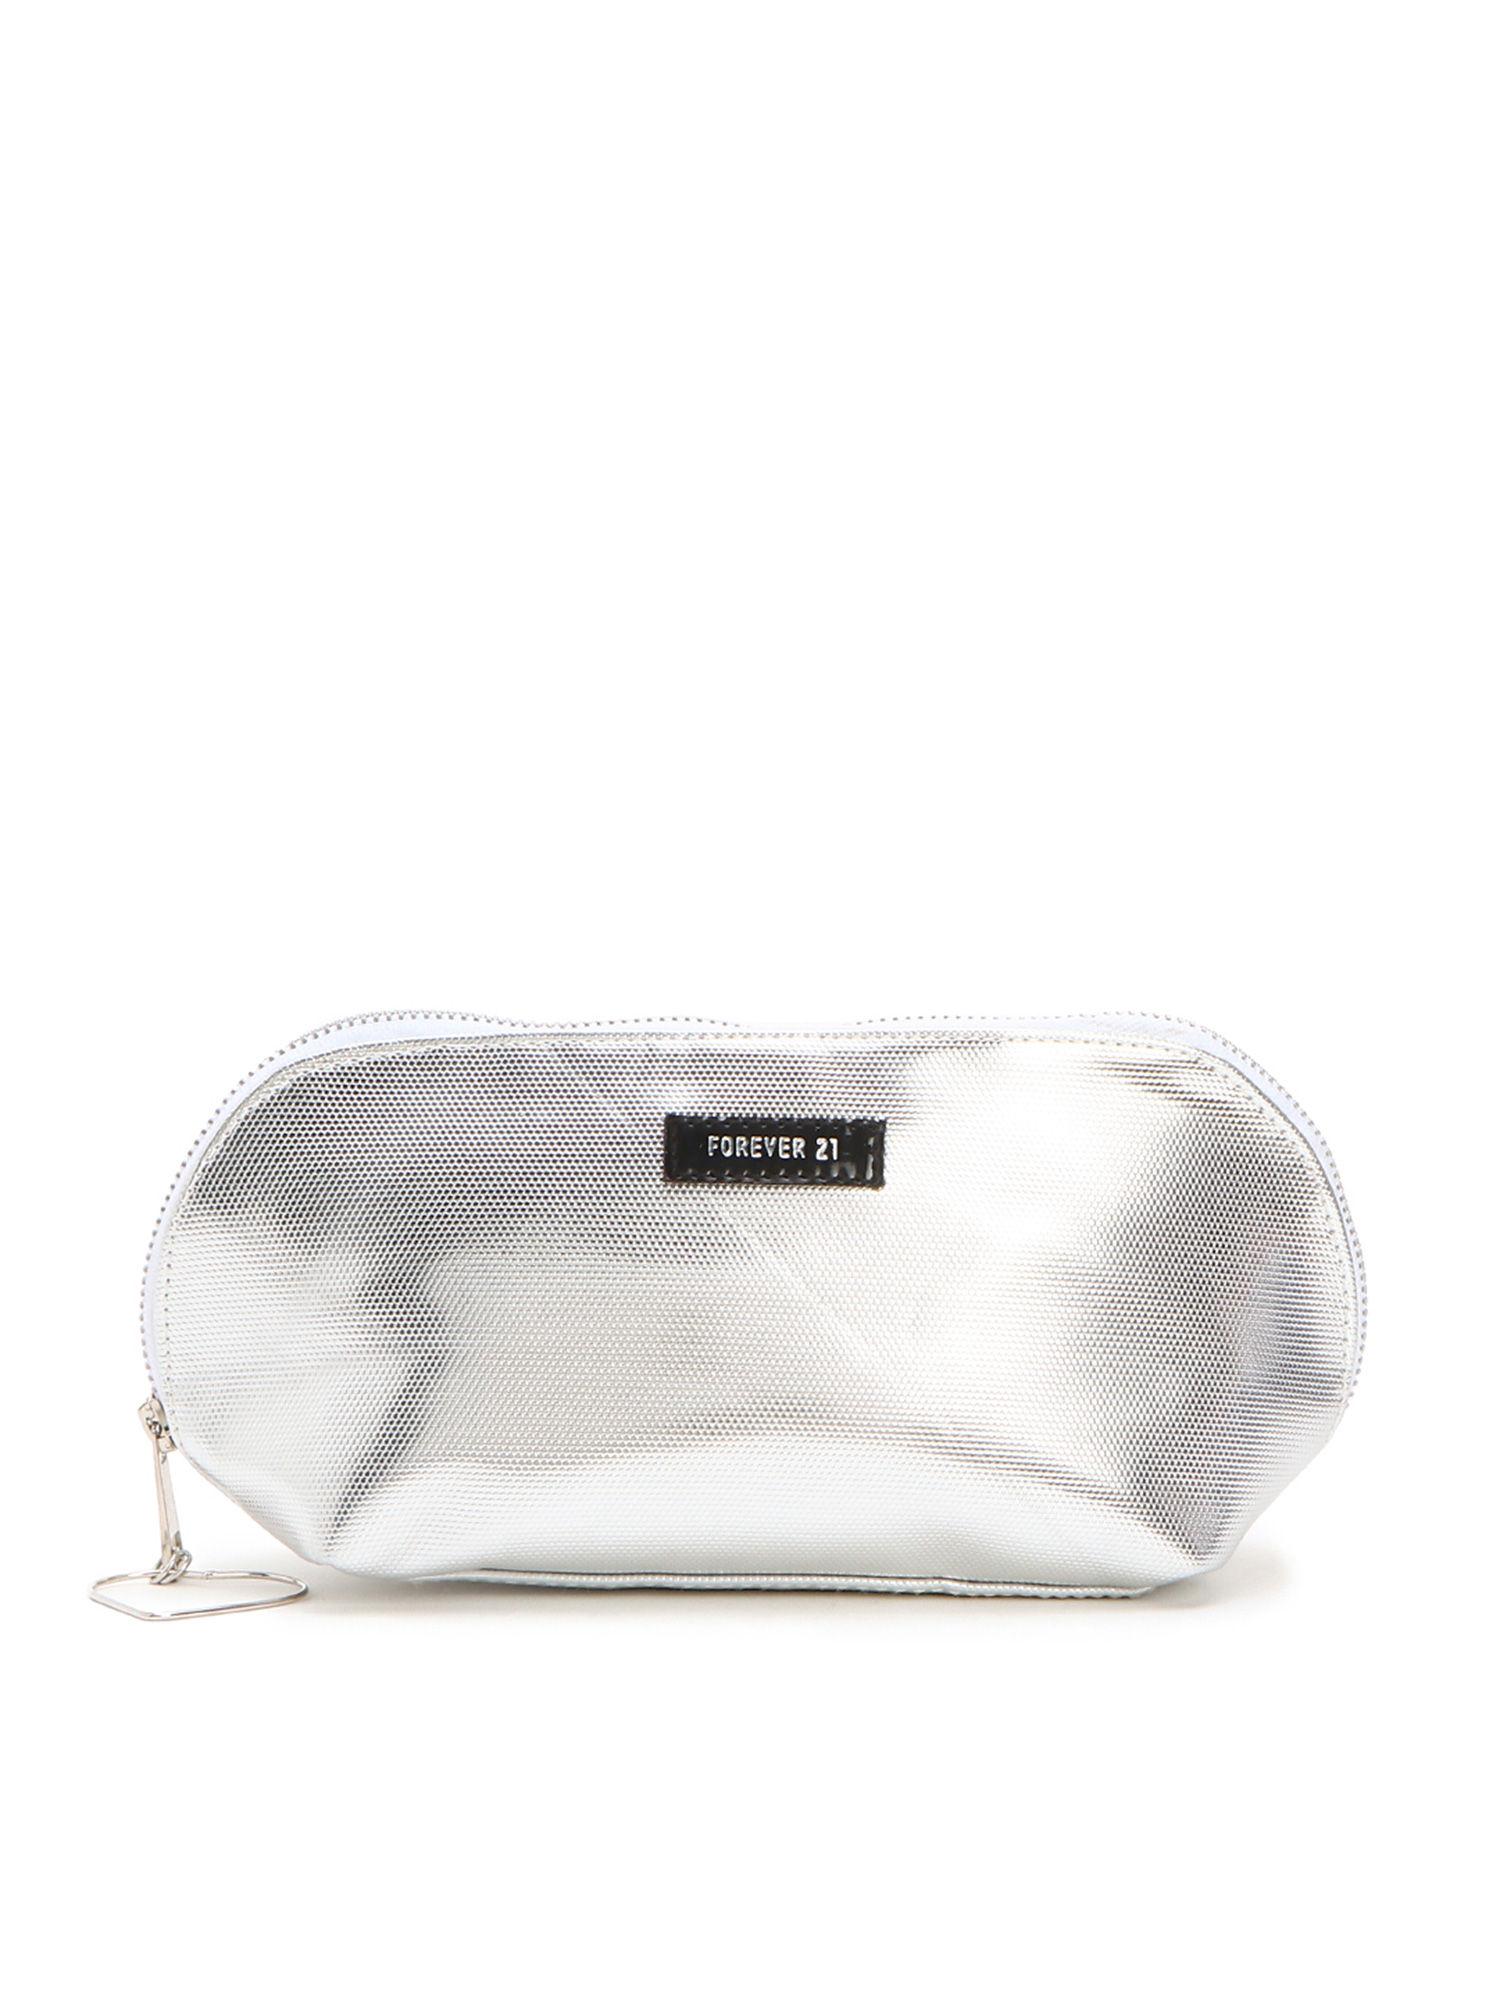 silver-pouch